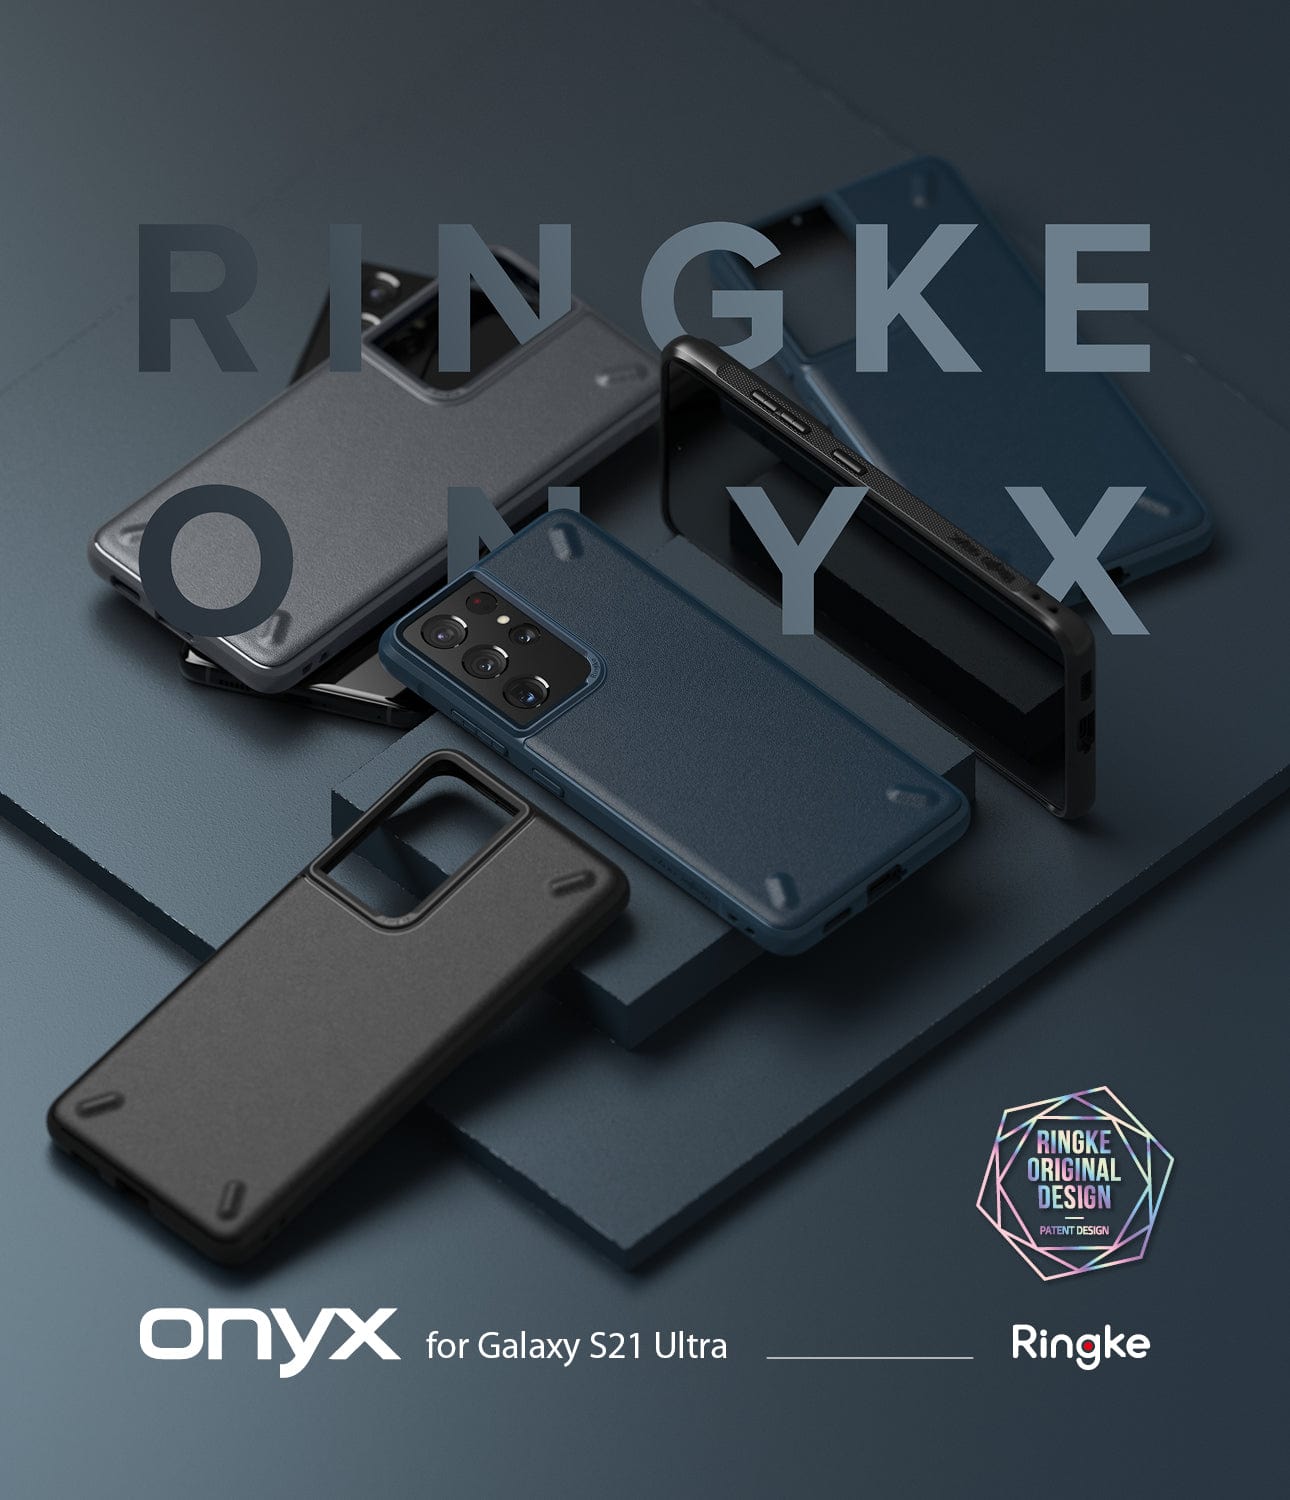 Discover the Ringke Onyx Case, specifically designed for the Galaxy S21 Ultra, offering stylish protection for your device.